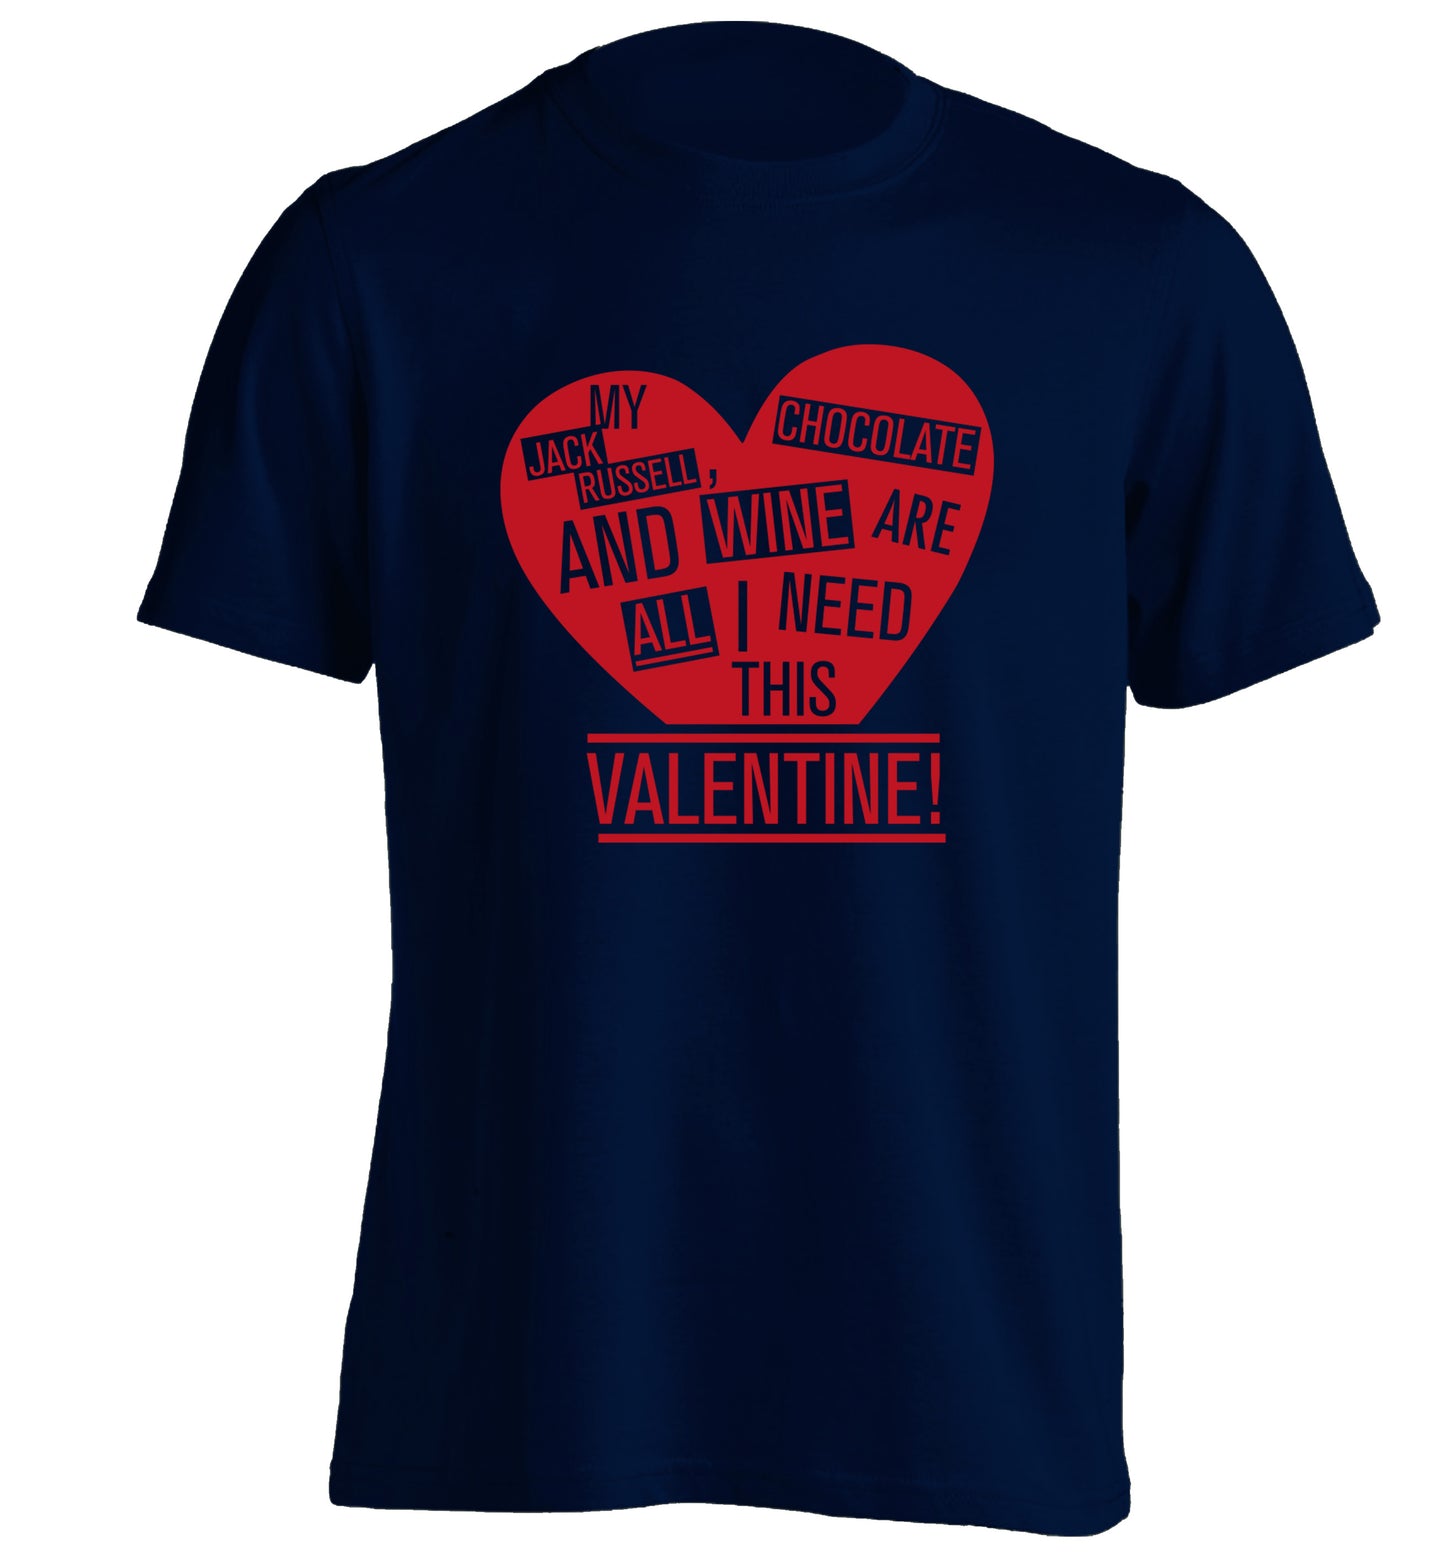 My jack russell, chocolate and wine are all I need this valentine! adults unisex navy Tshirt 2XL